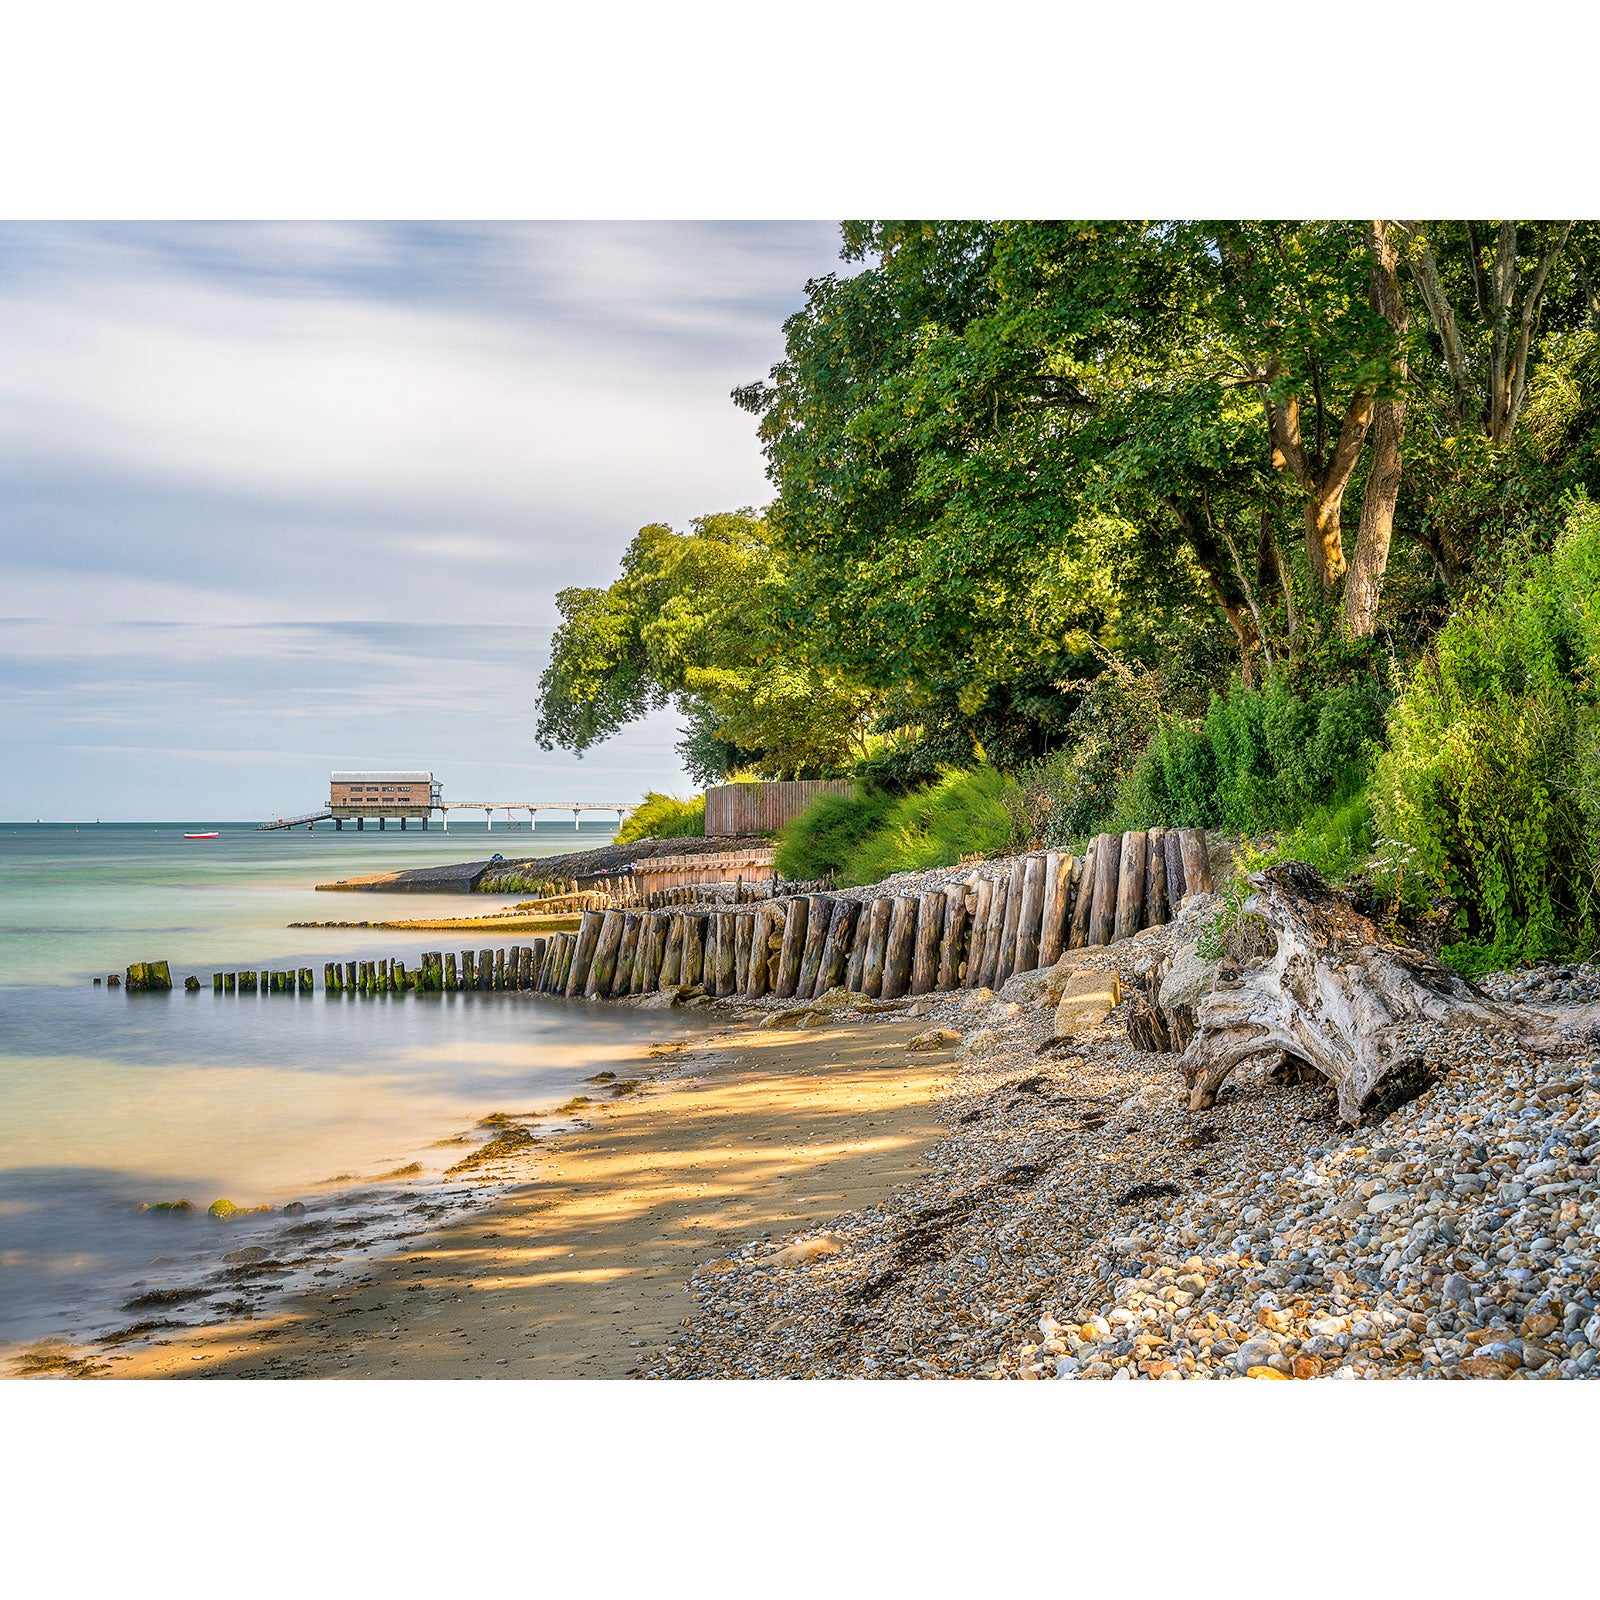 Serene coastal landscape on Bembridge Beach with wooden groynes and an overgrown shoreline leading to a calm sea by Available Light Photography.